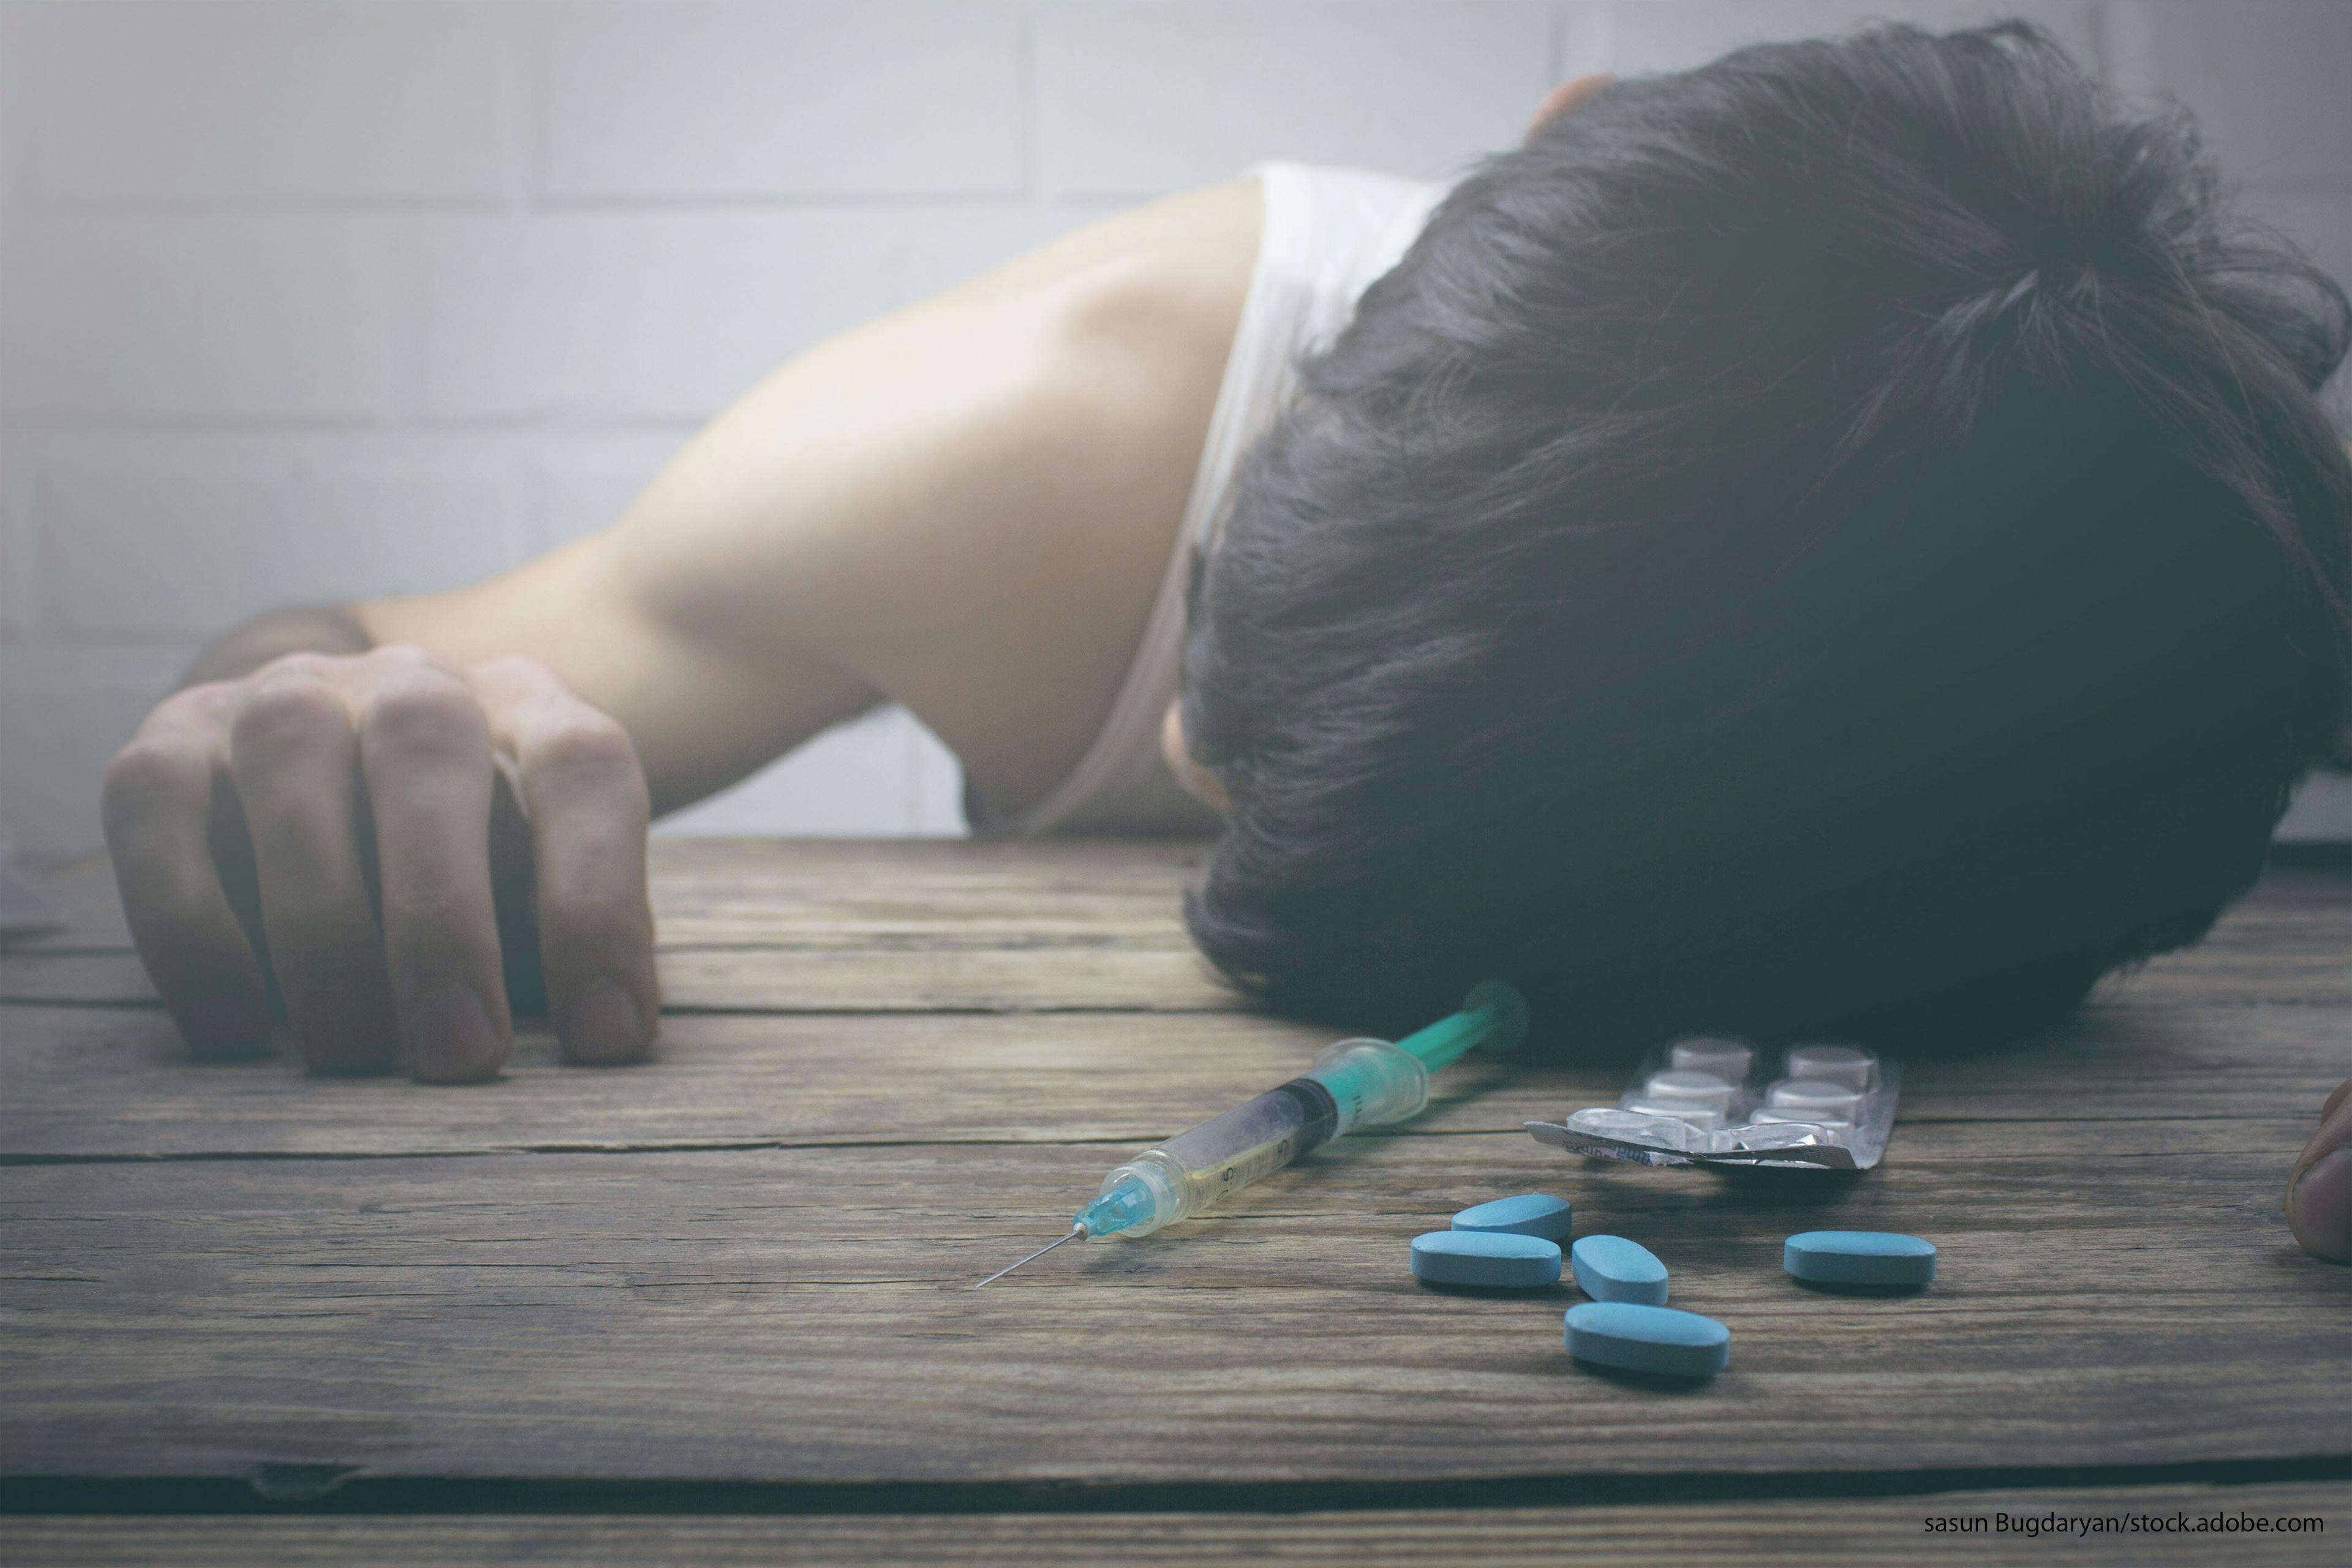 A Rising Tide of Drug Use and Disorders